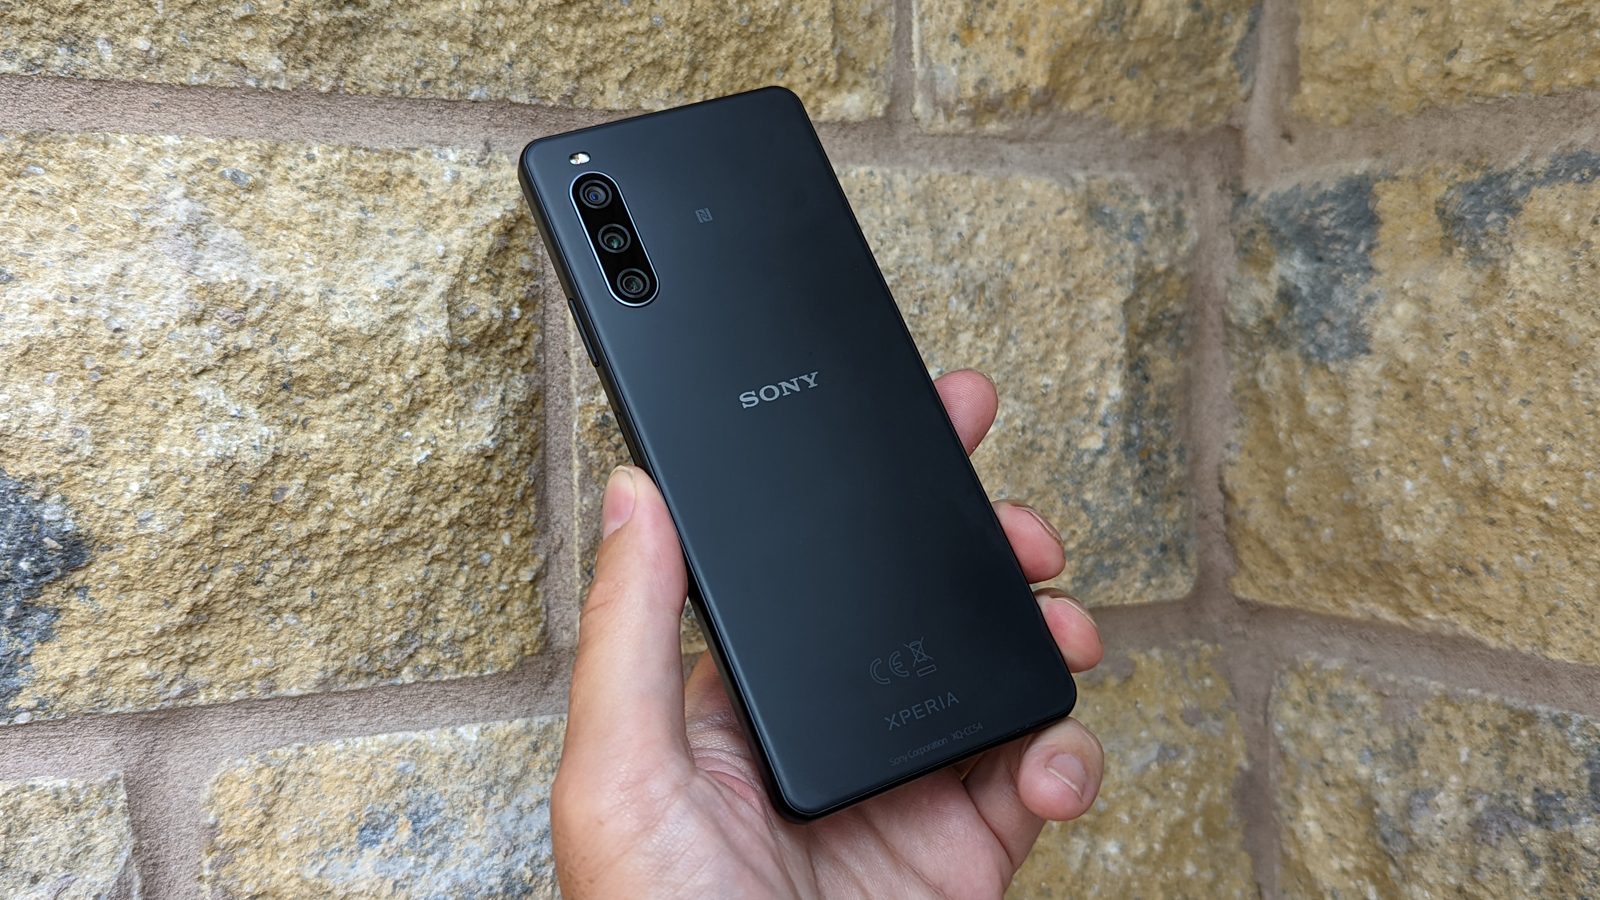 The Sony Xperia 10 IV (back), held in a hand